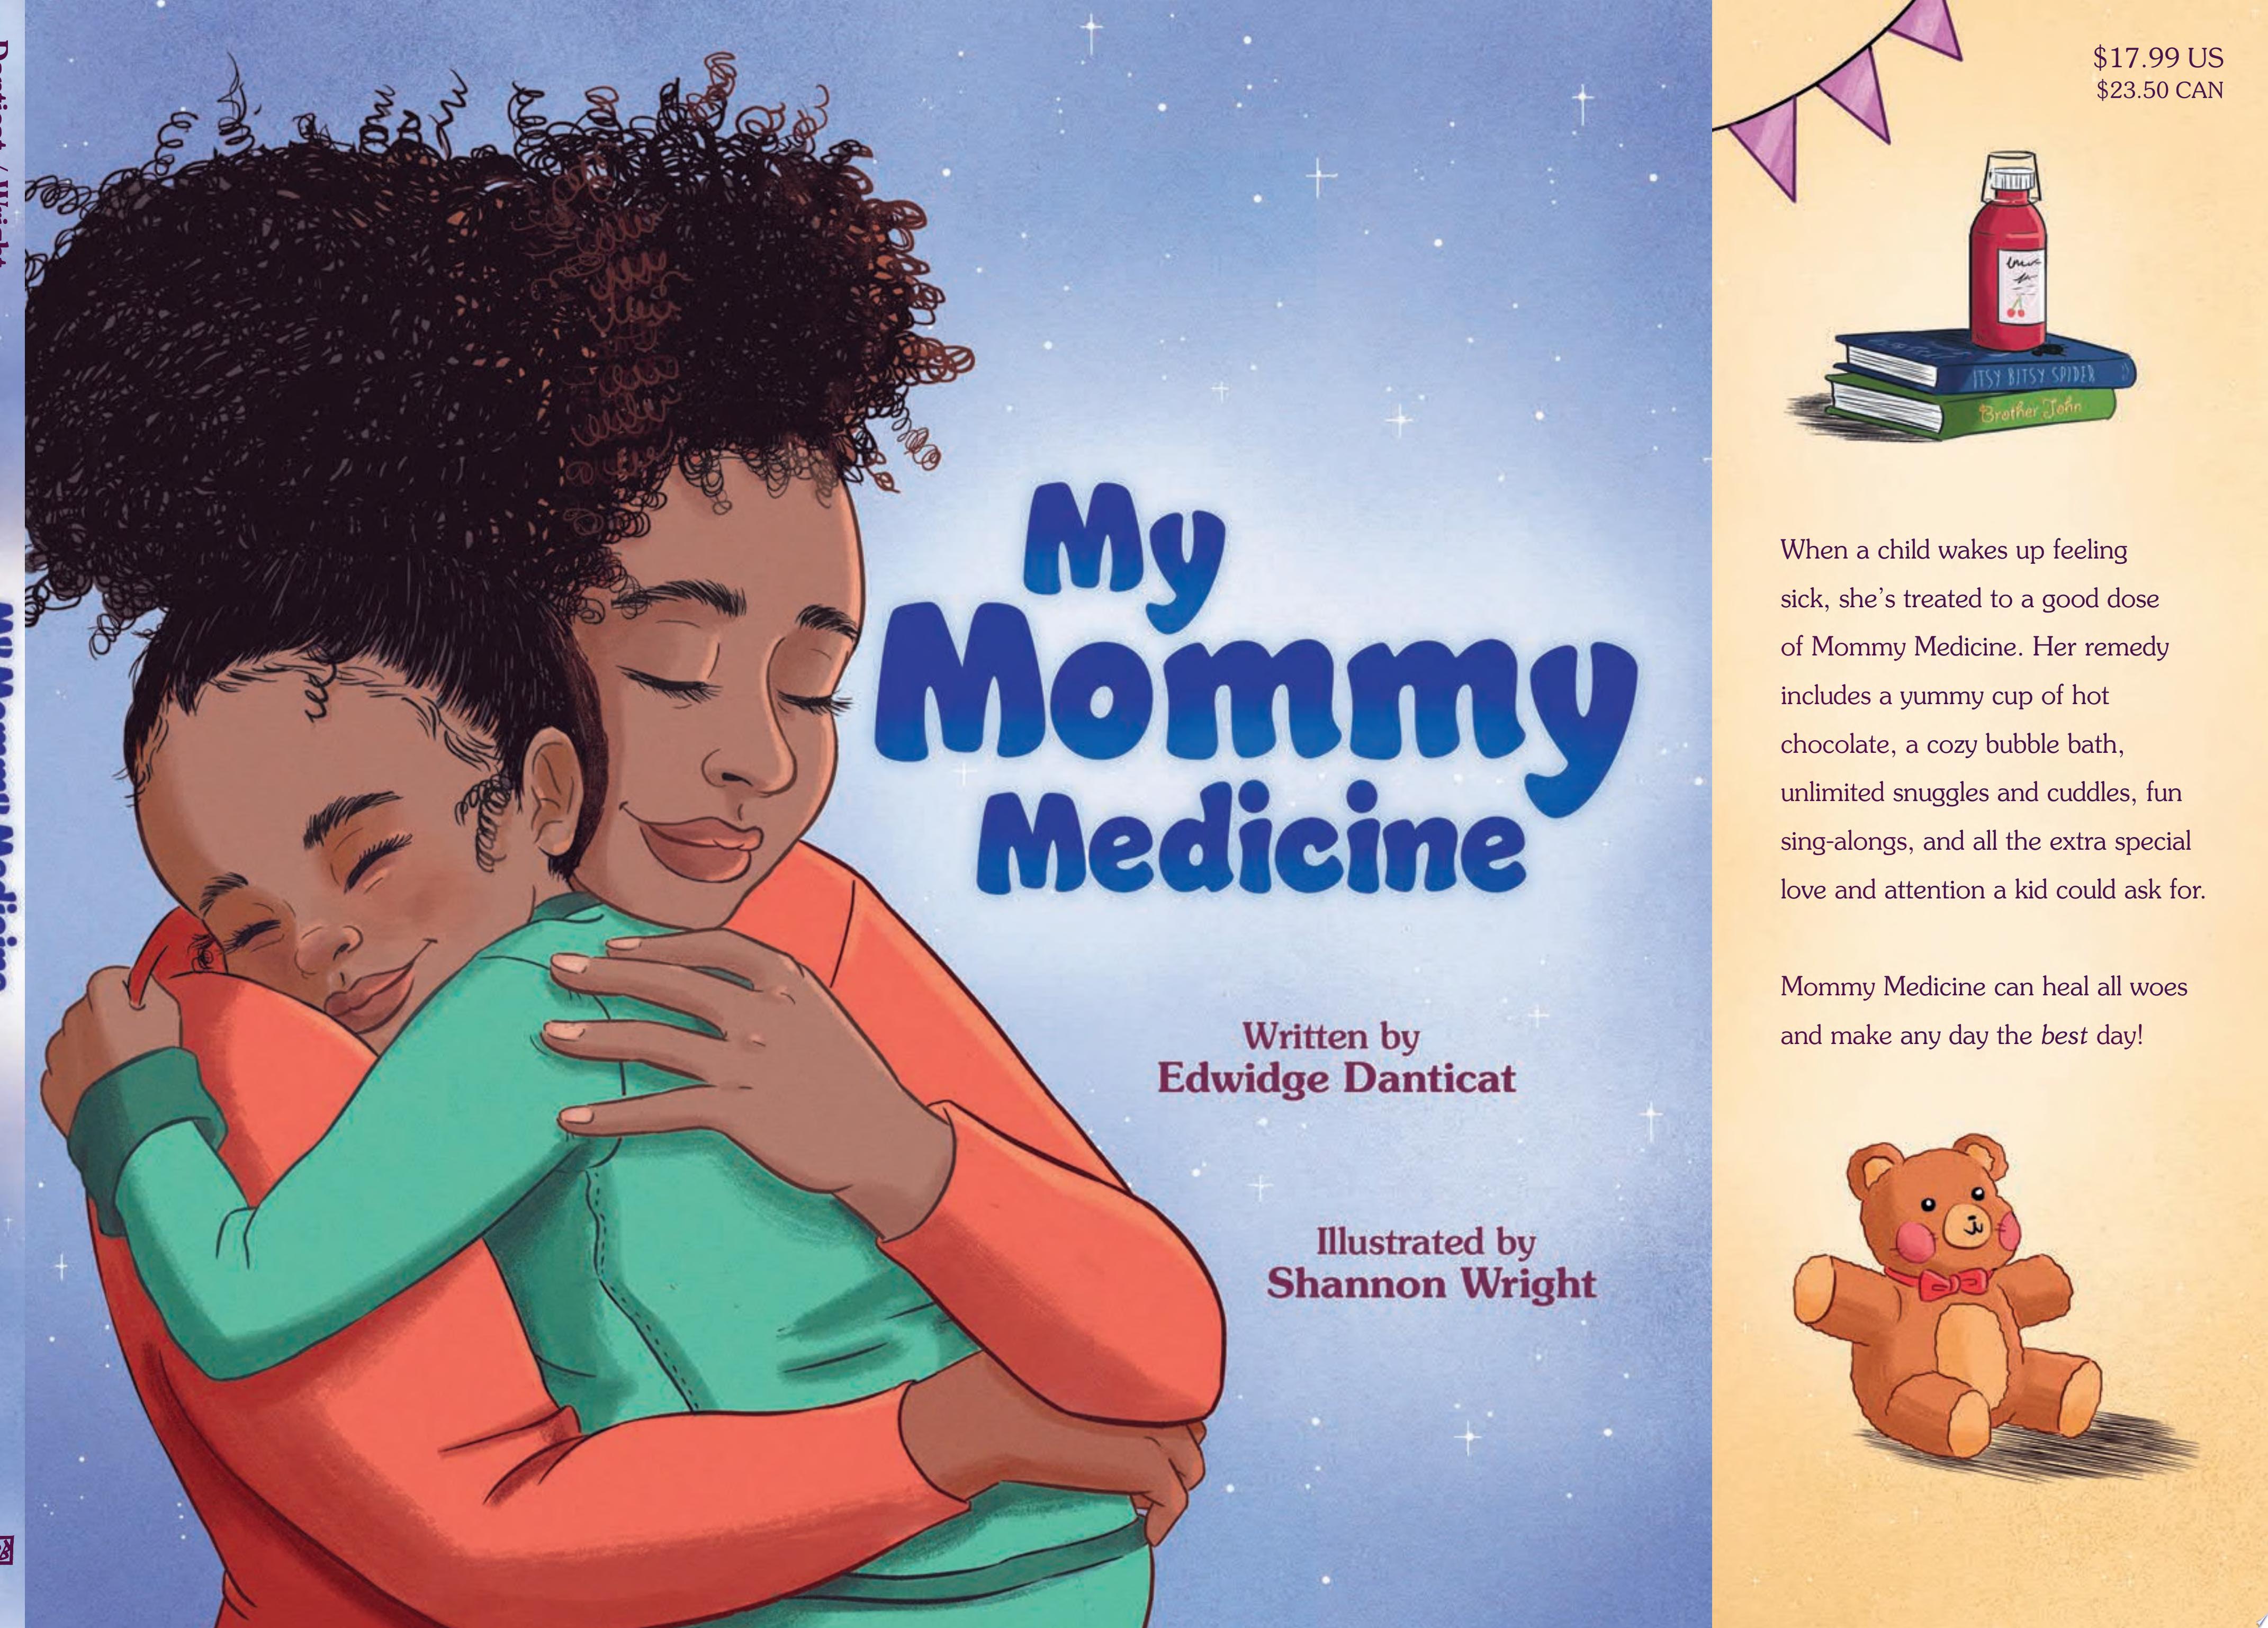 Image for "My Mommy Medicine"